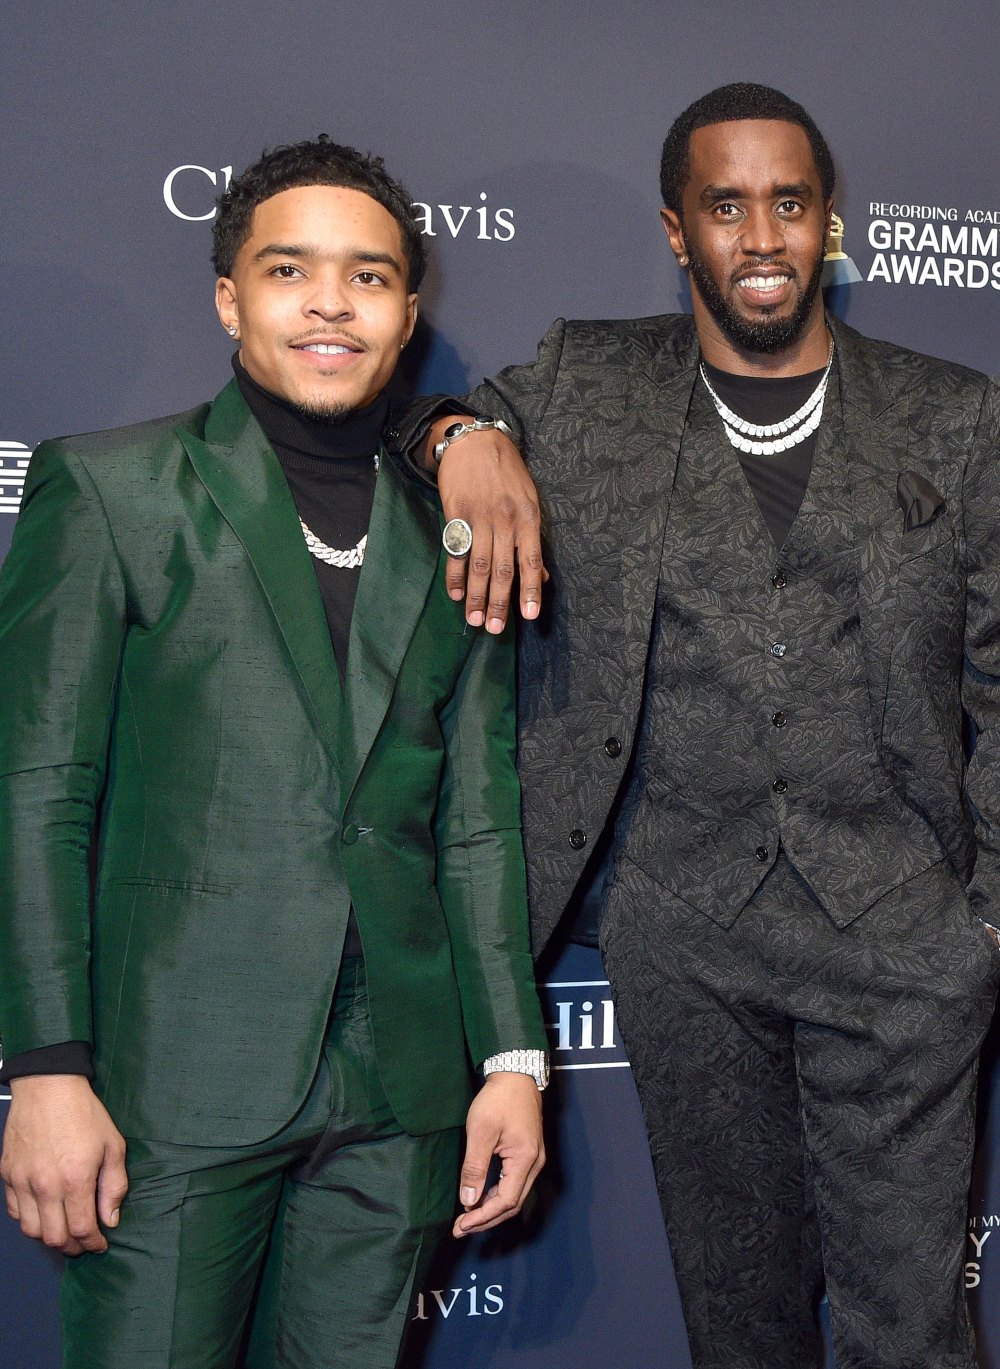 Diddy s Son Justin Combs Was Named in Lawsuit That Mentions Sex Trafficking Before Being Detained 517